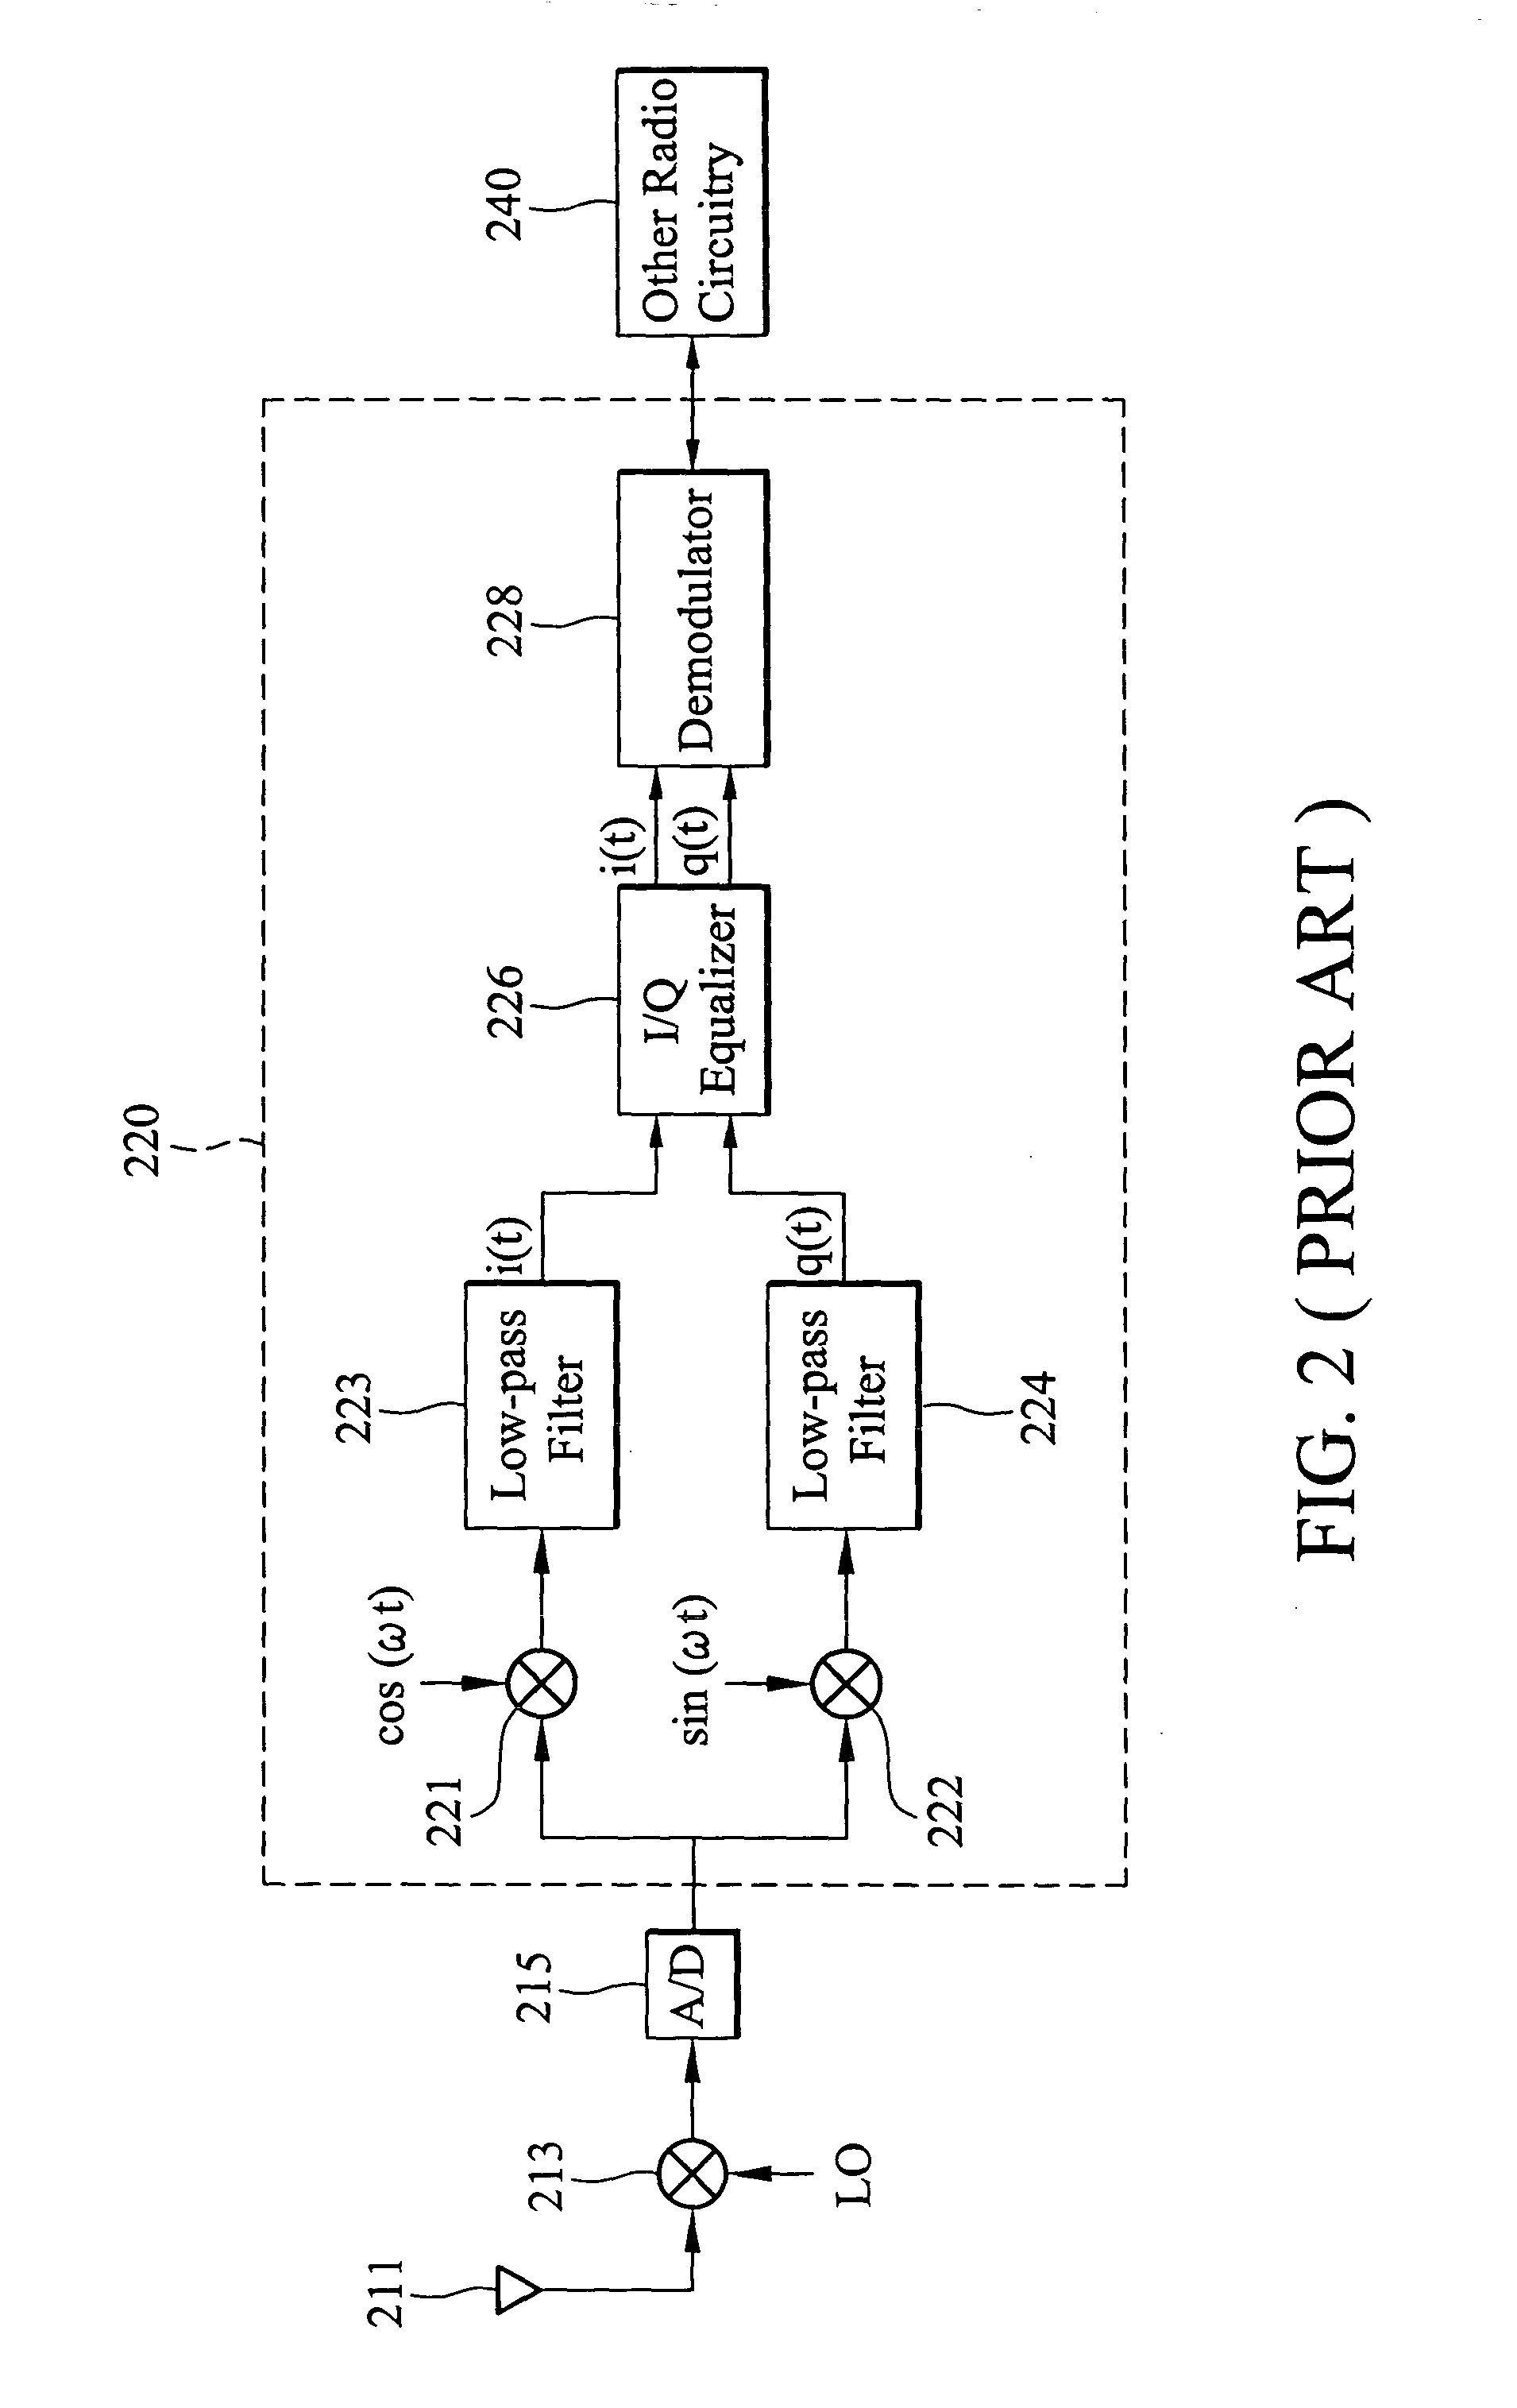 Method and apparatus for I/Q mismatch calibration in a receiver